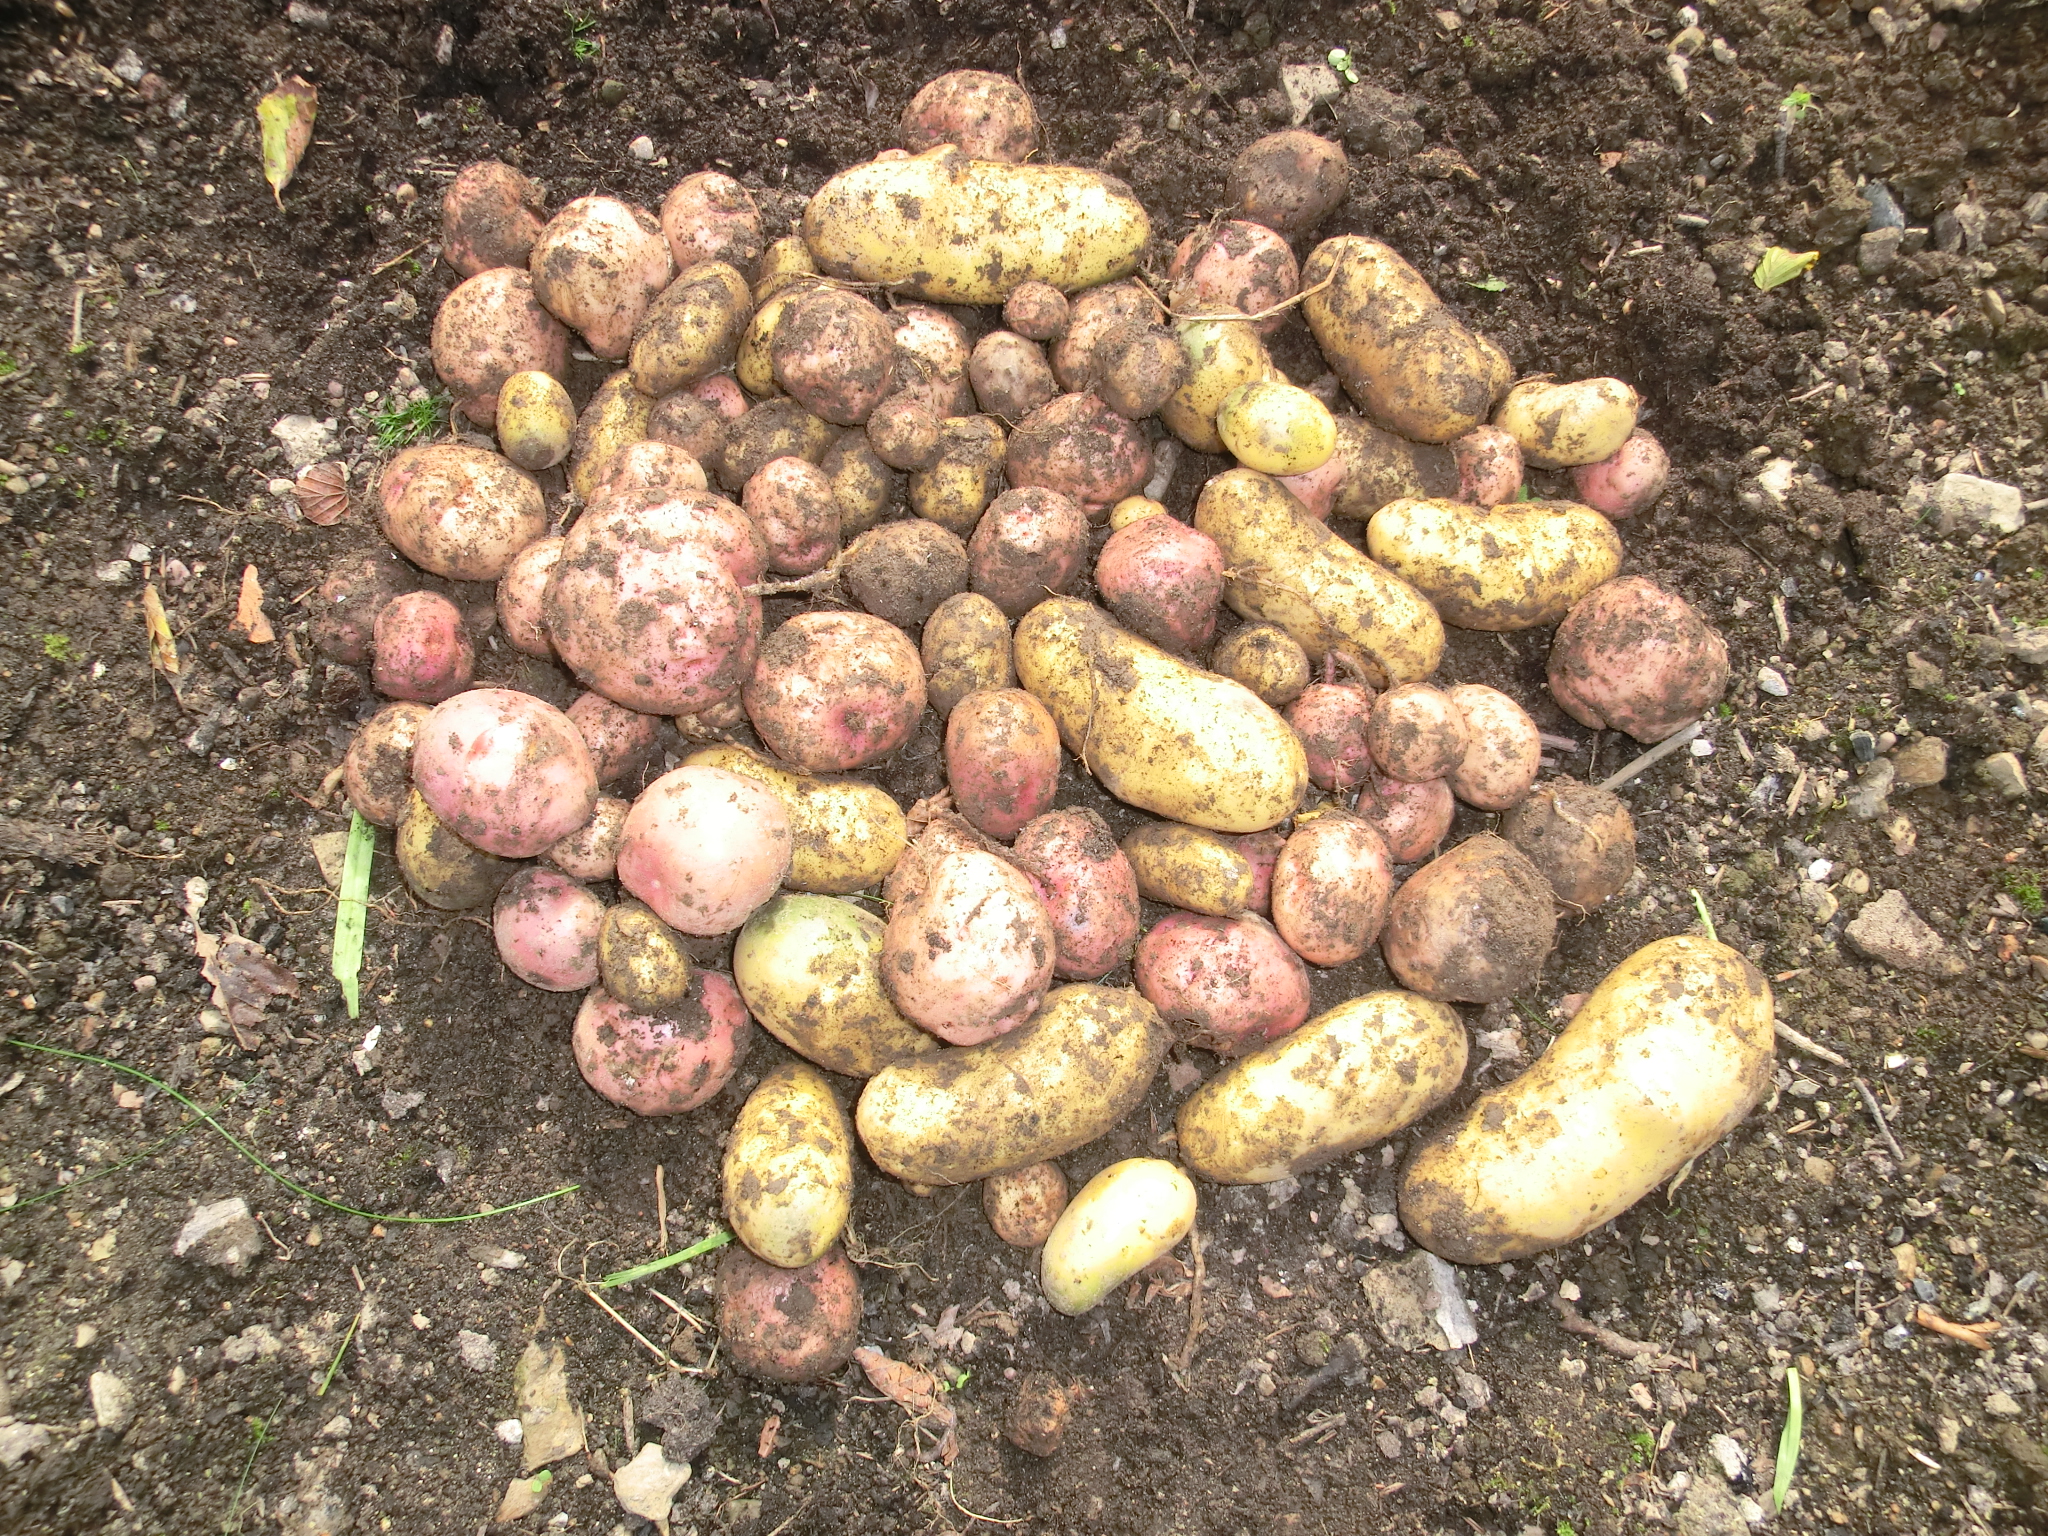 Potatoes - an unusual Valentine's Day gift!